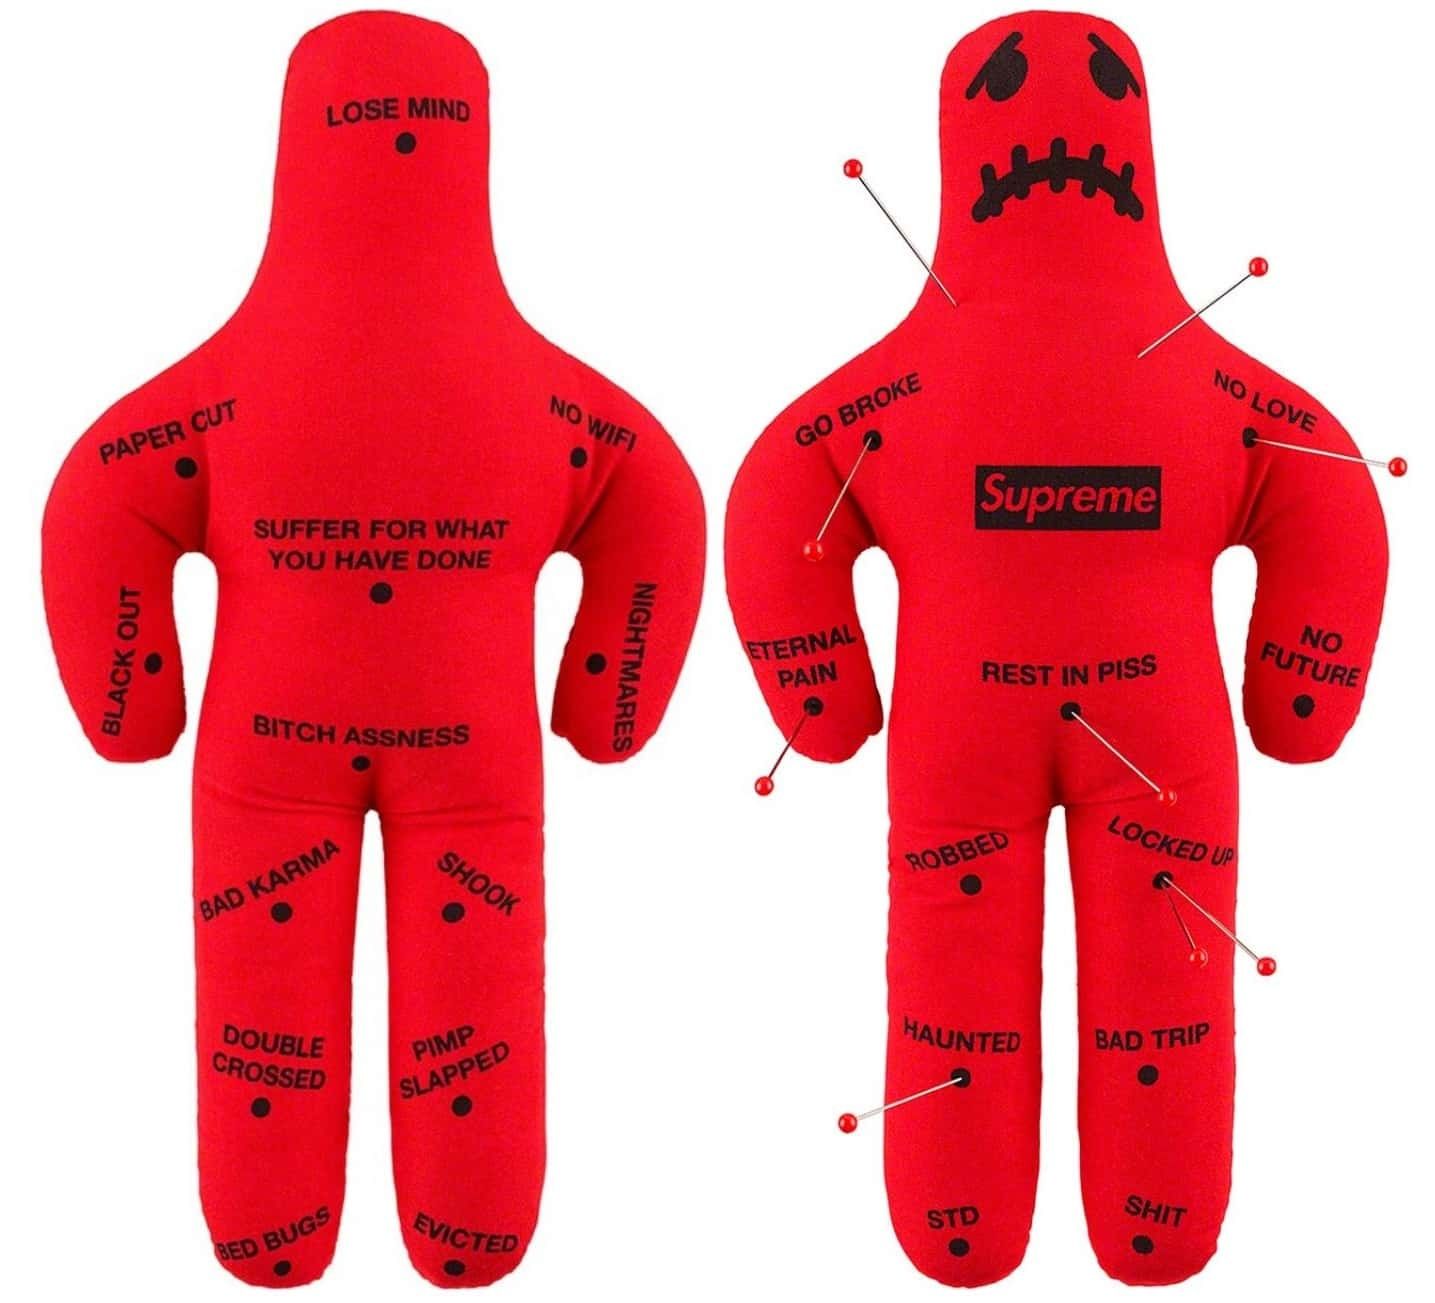 Supreme Red branded VooDoo doll - (left) backside; (right) front stuck with pins